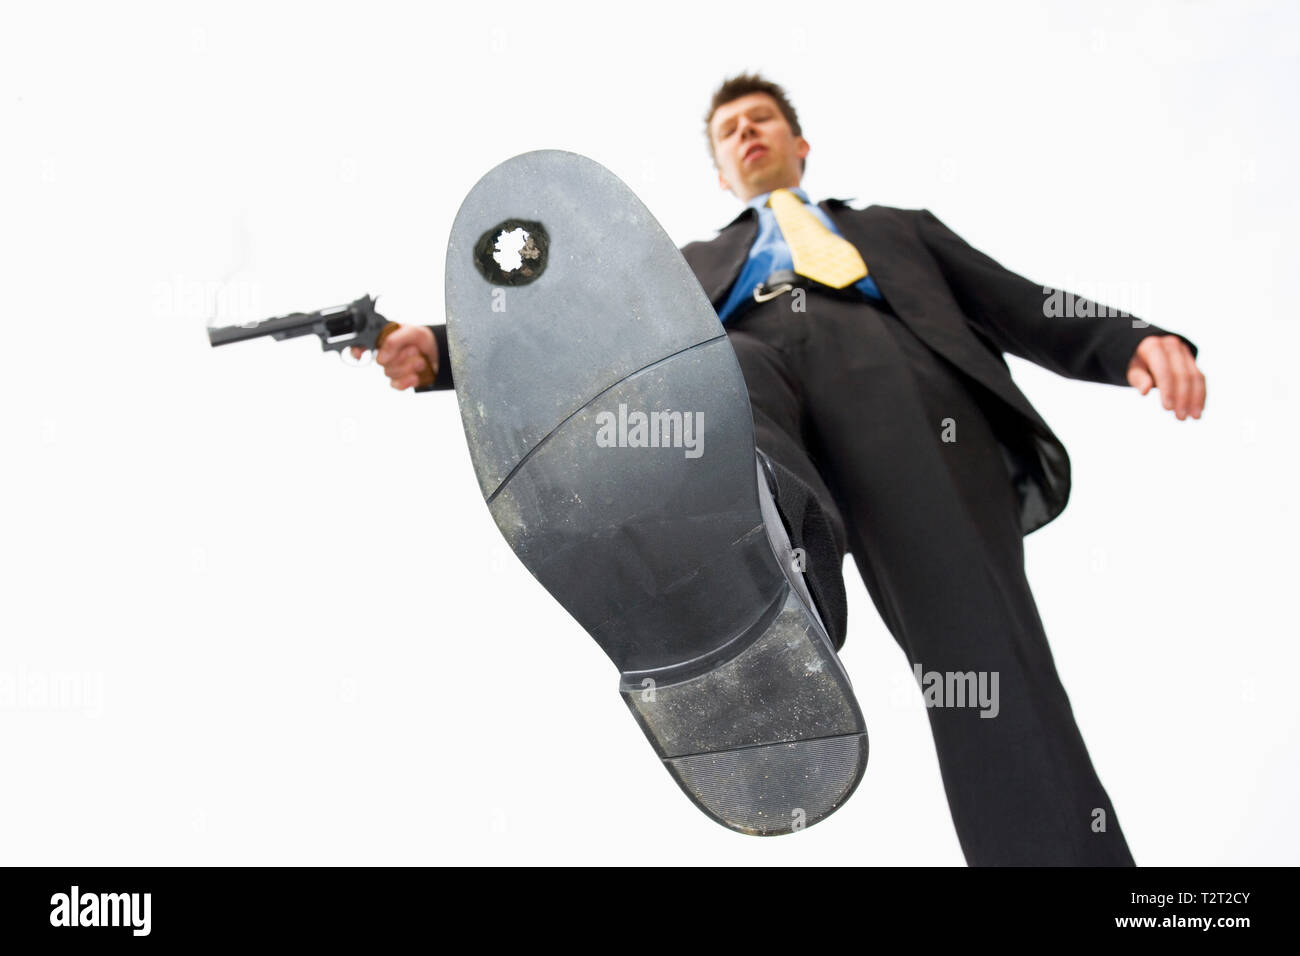 Businessman shooting himself in the foot Stock Photo